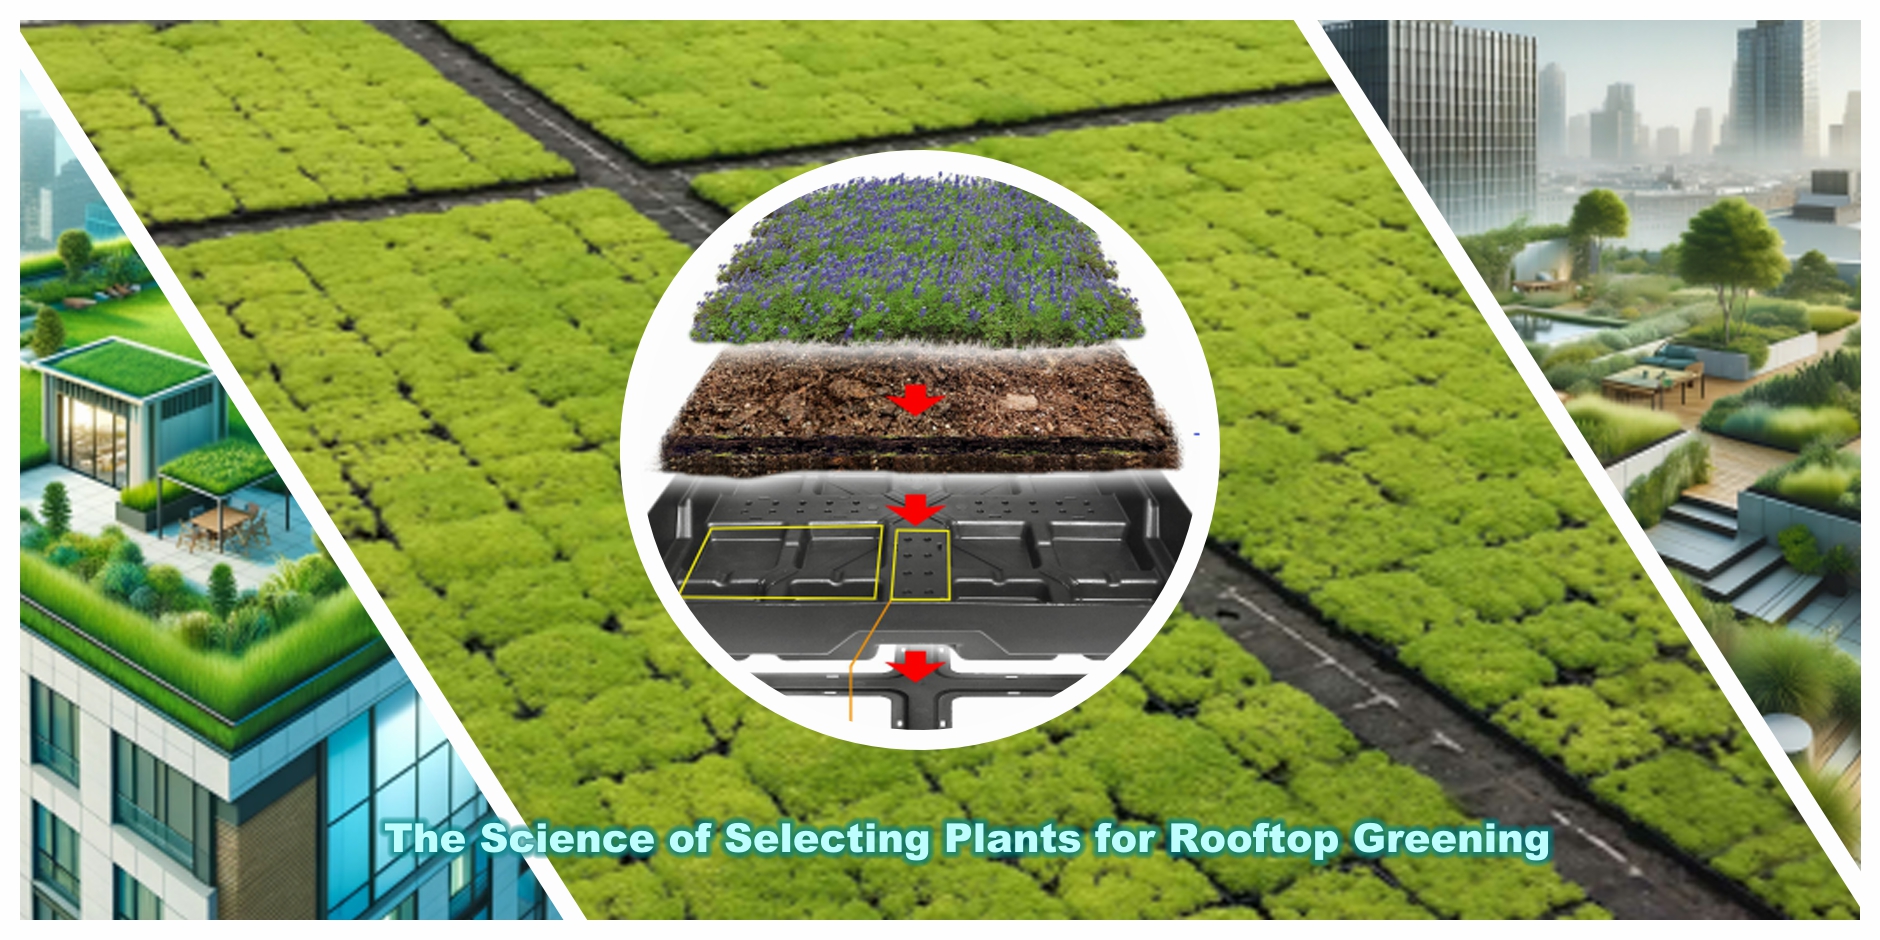 Explore the science behind choosing plants for rooftop greening and learn about the effectiveness of LEIYUAN's Green Roof Trays in fostering sustainable urban ecosystems.